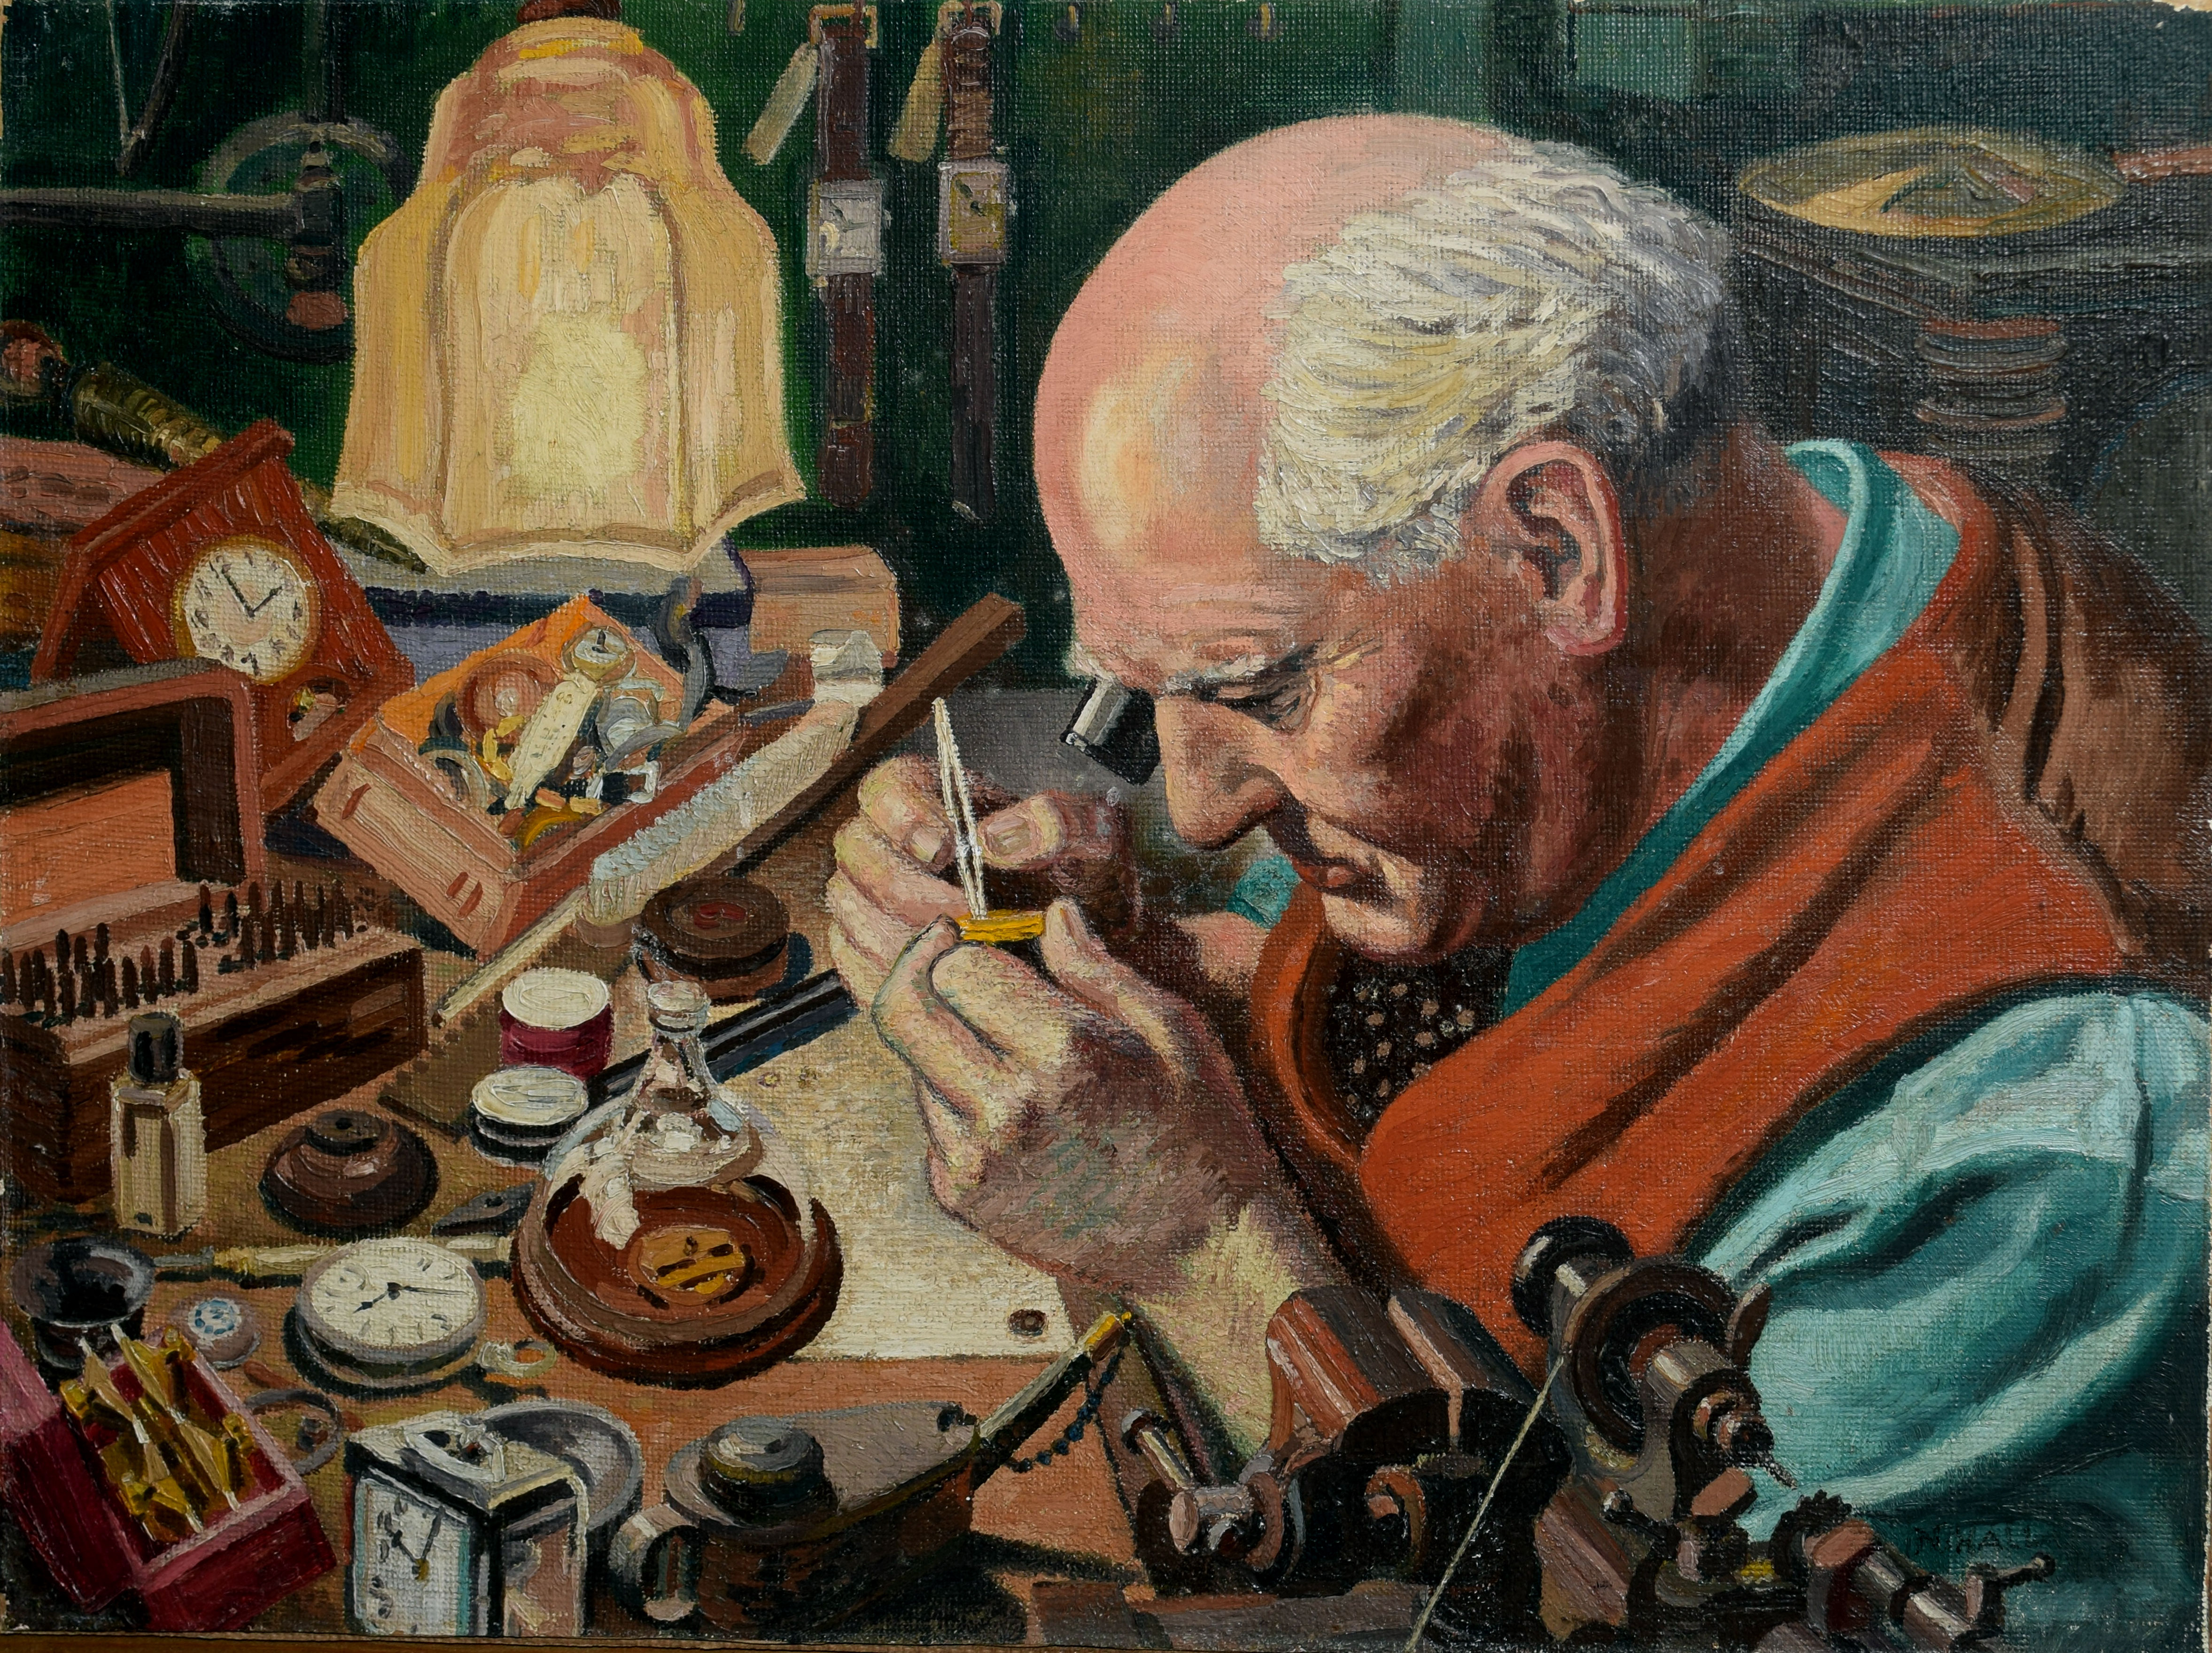 N L Hall, "Sam Veale (Newquay Watchmaker)", oil on panel, signed lower right, 35 x 46cm, unframed